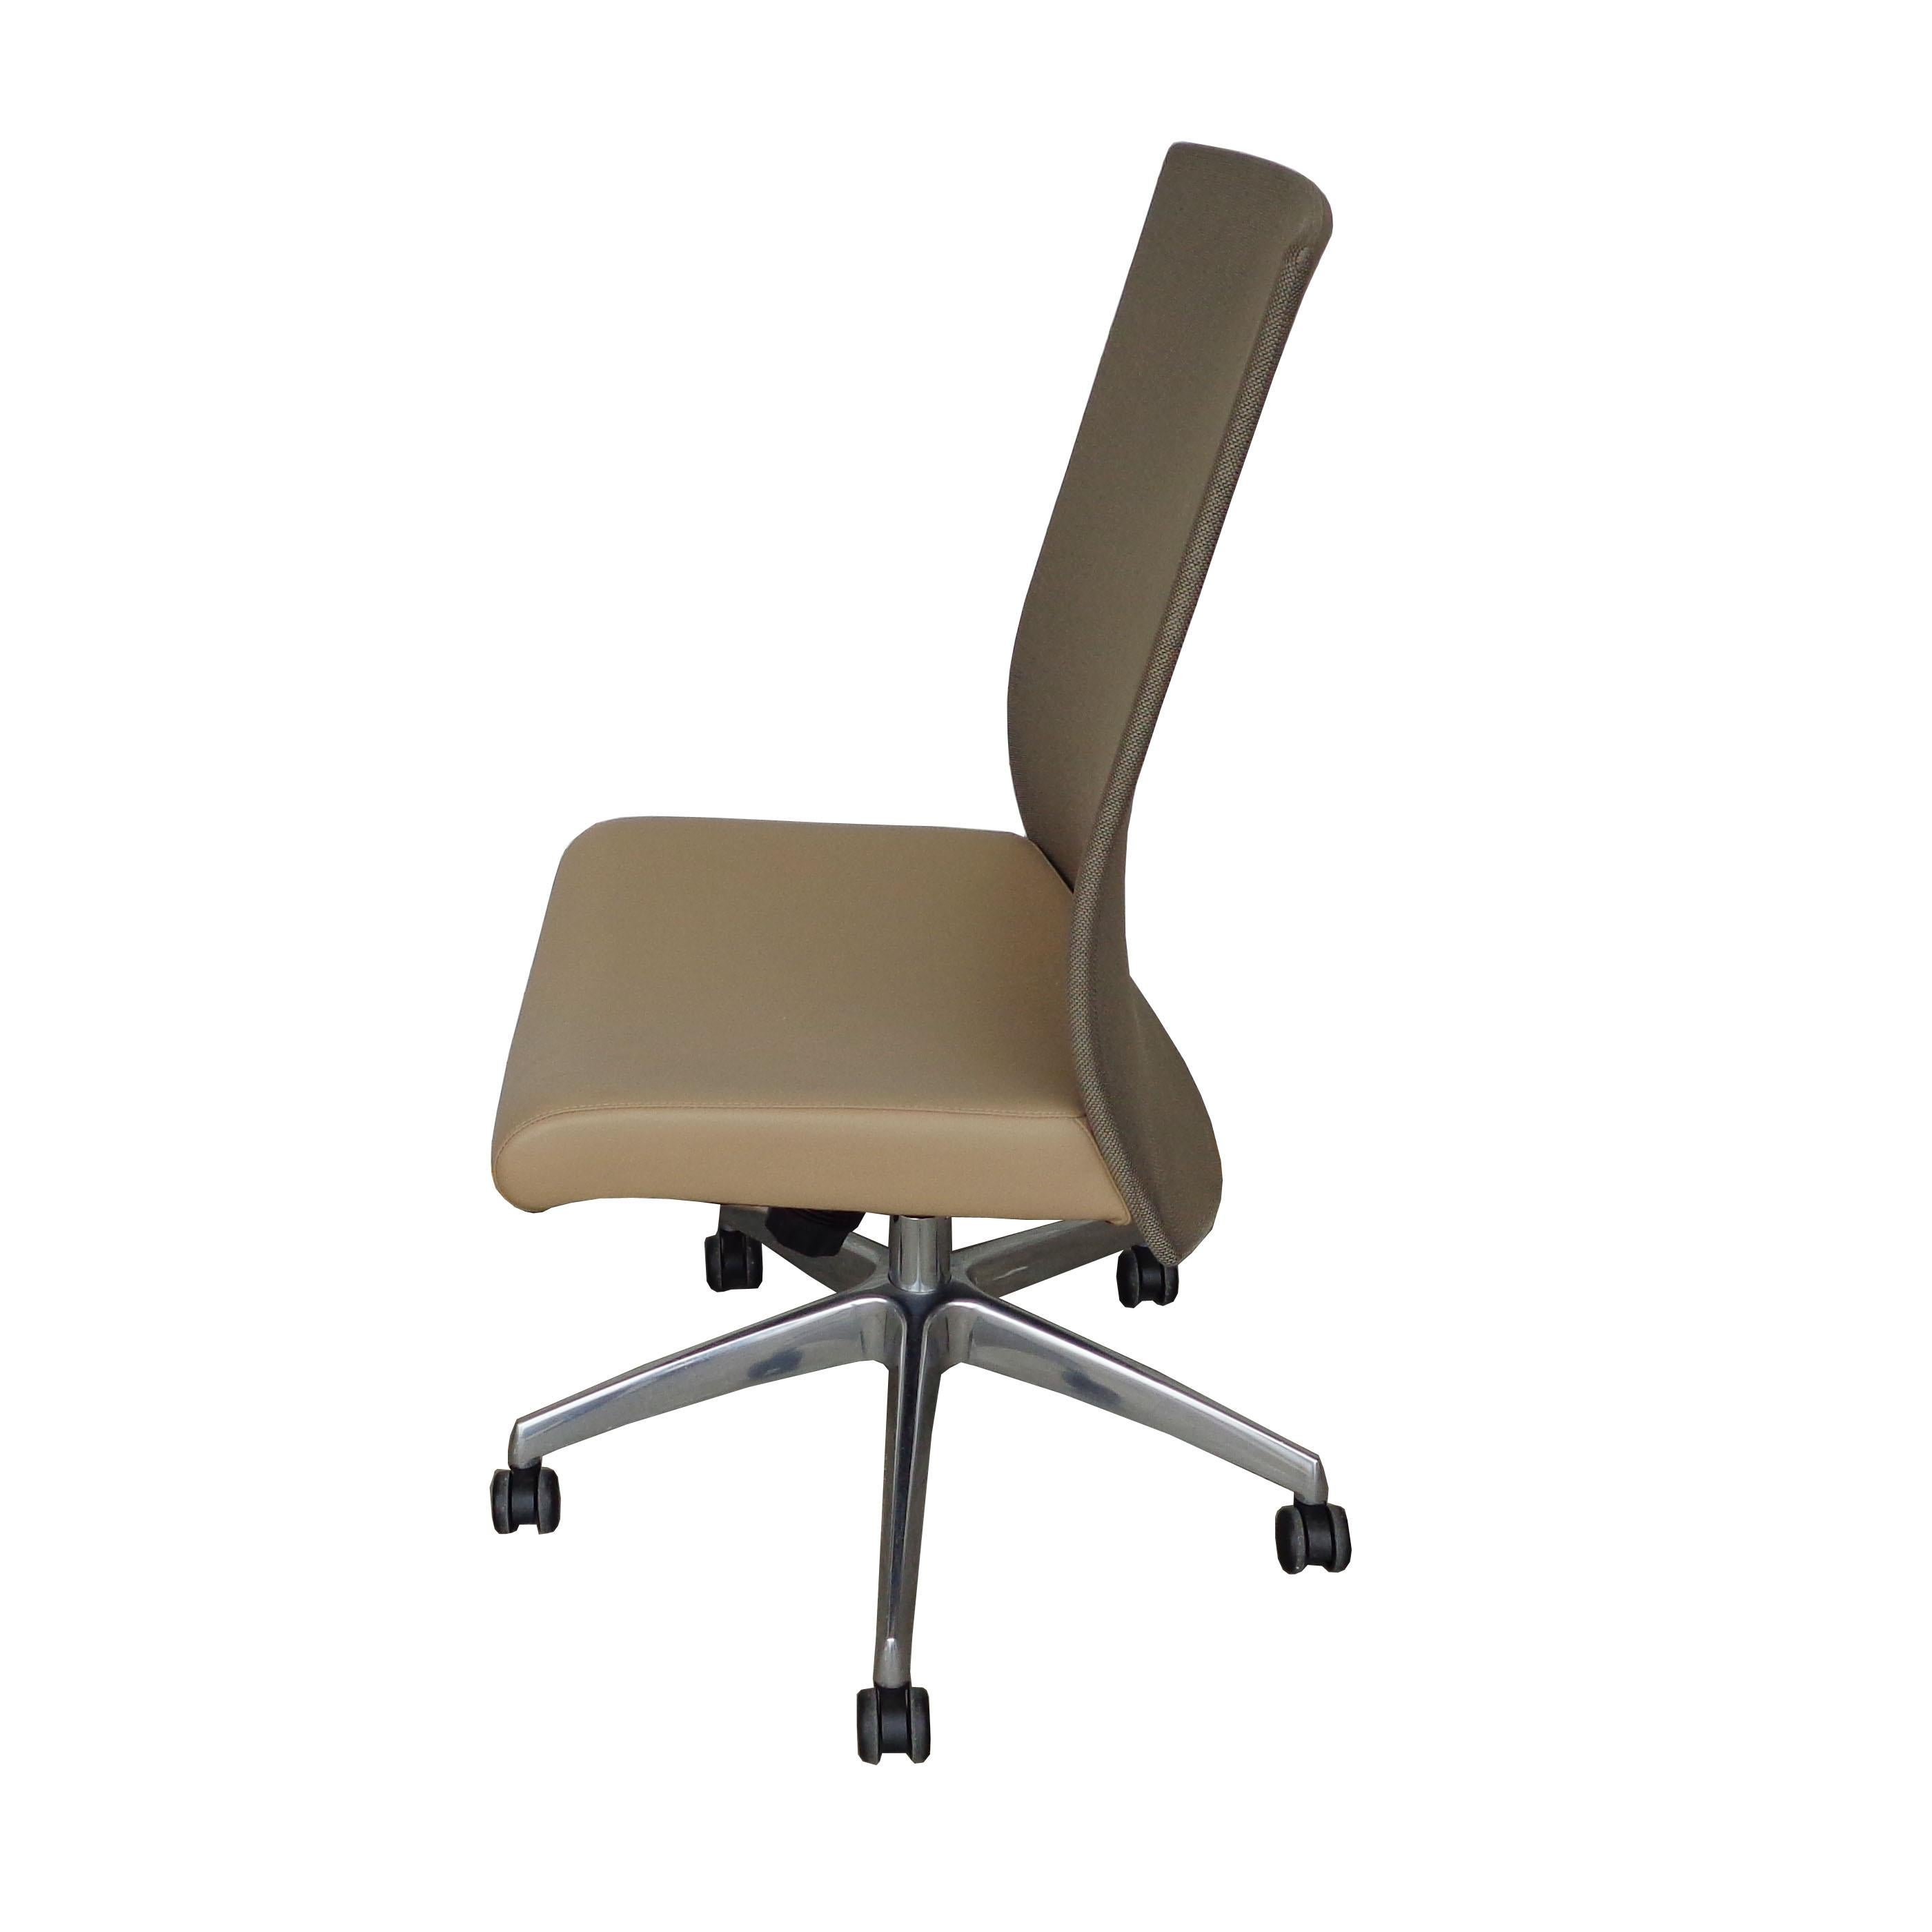 Modern 1 Stylex Sava Conference Chair 6 Available For Sale